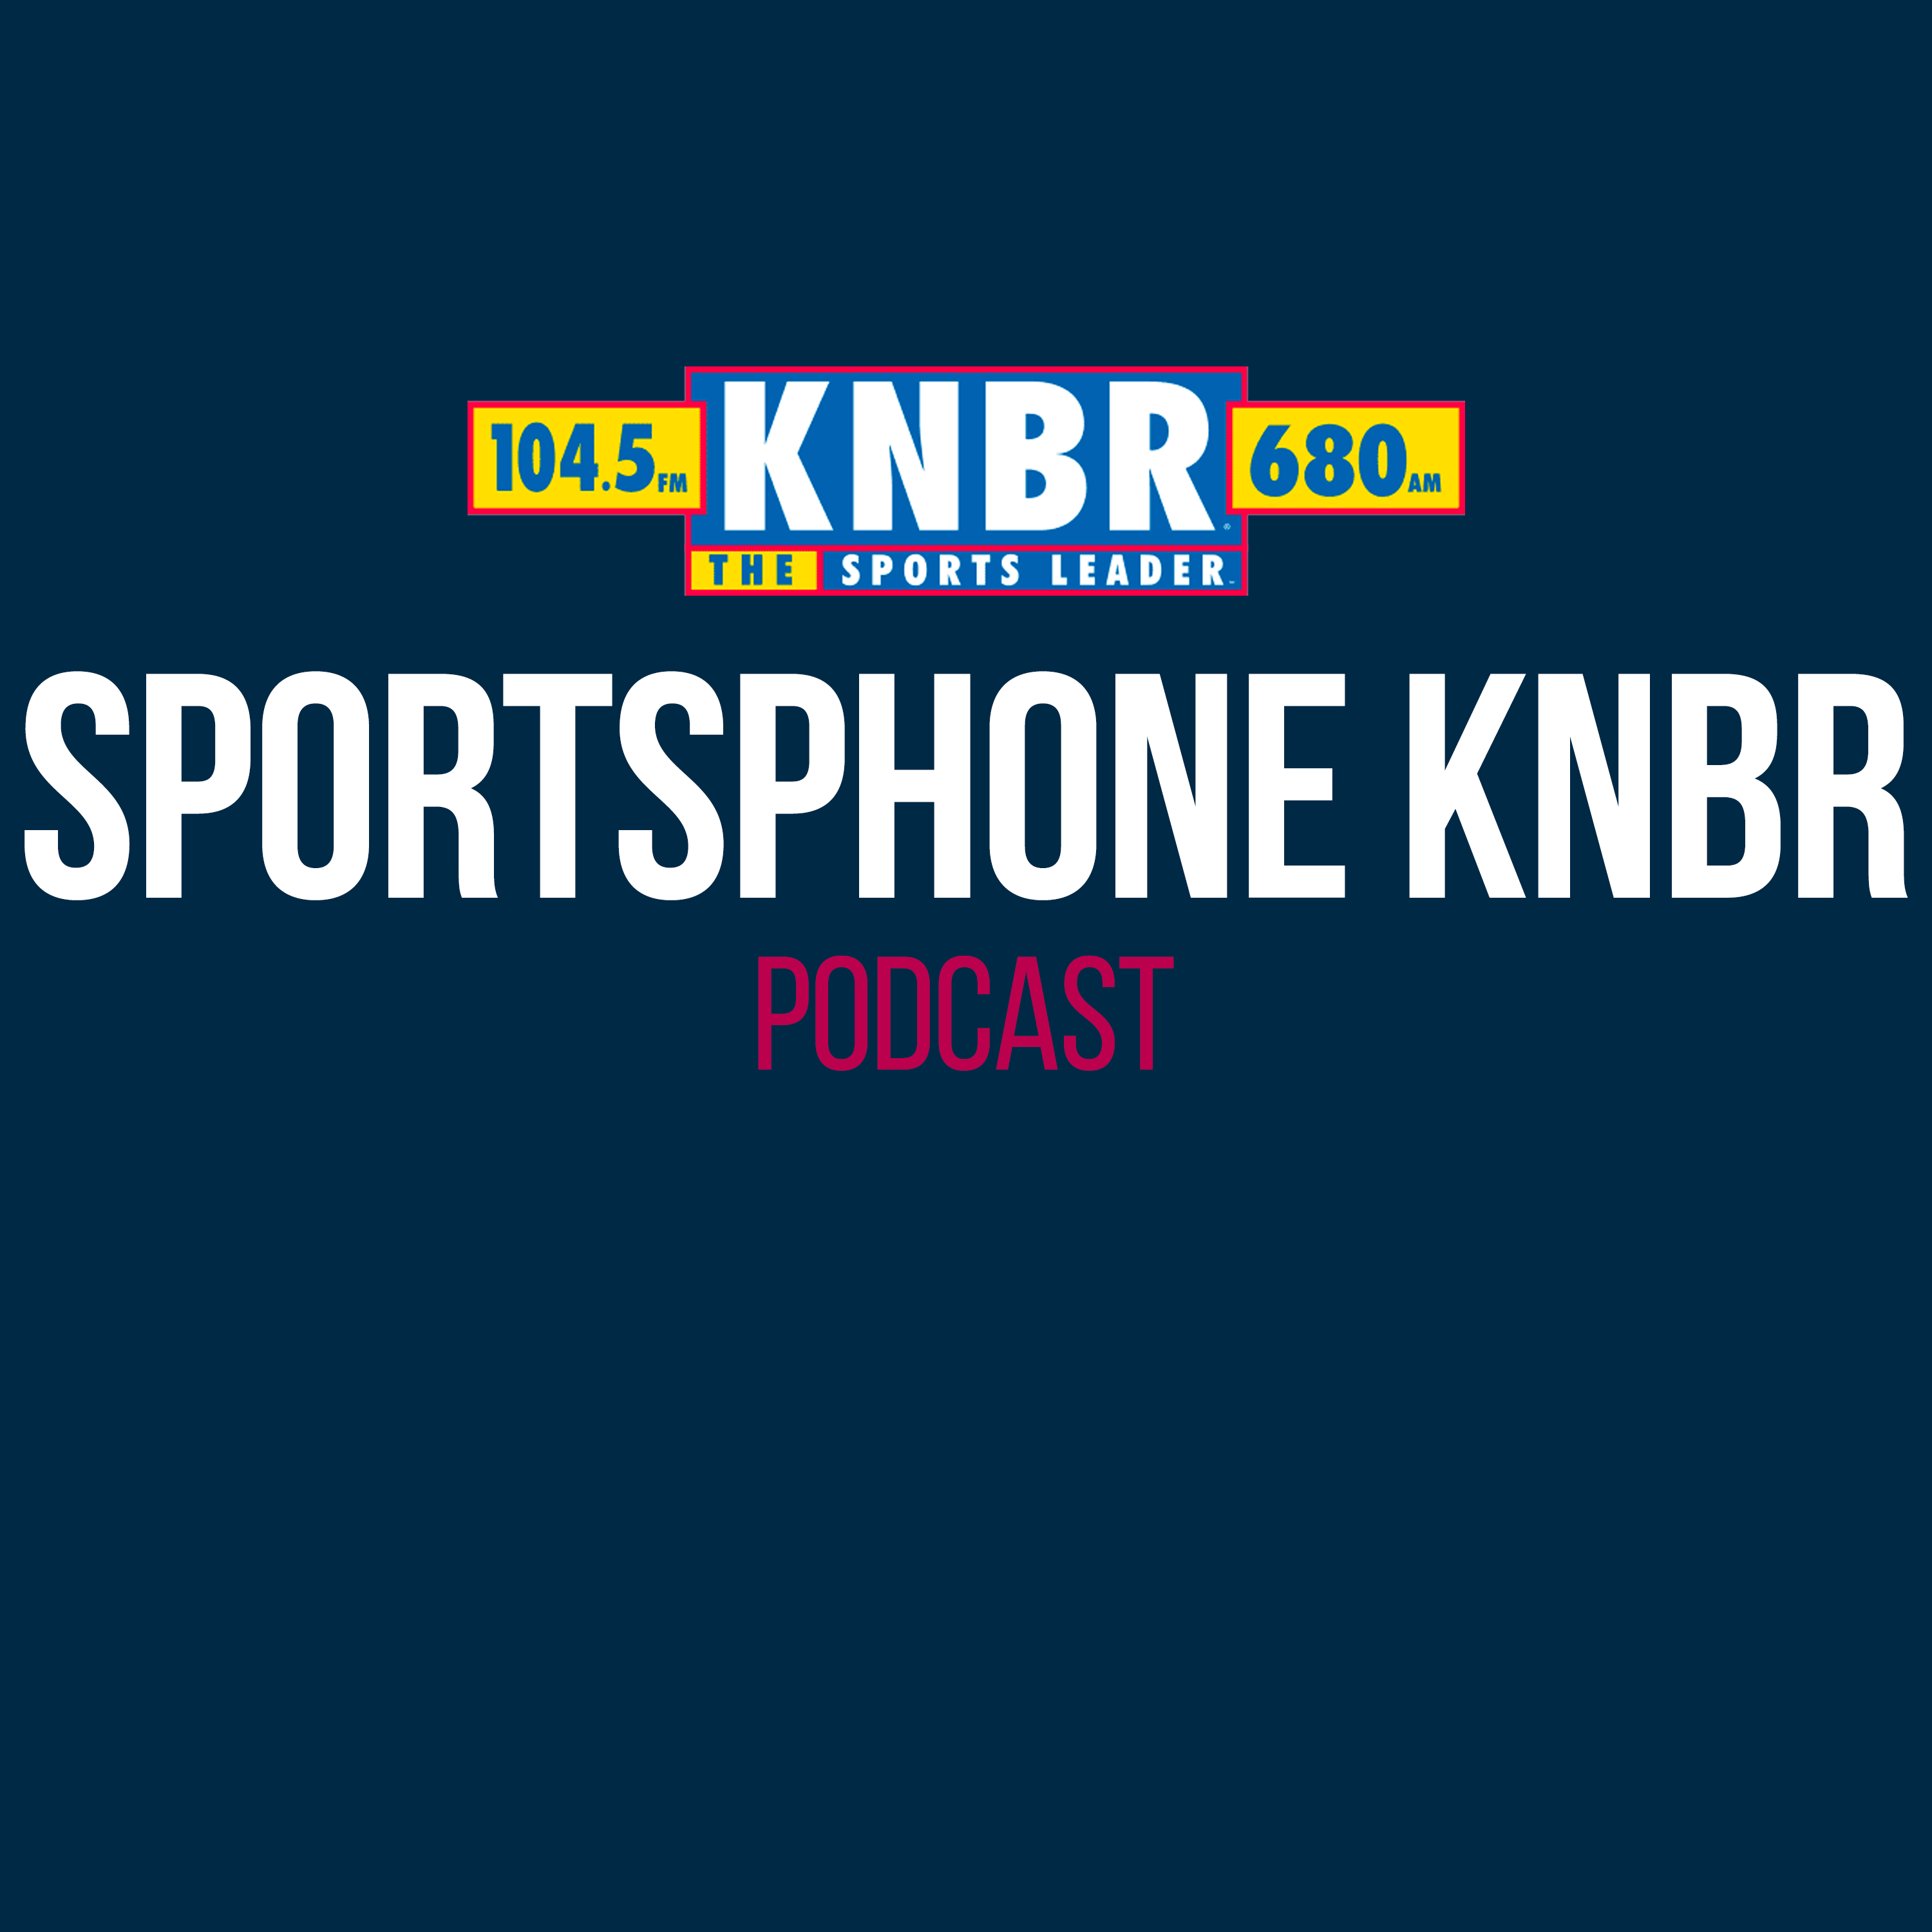 5-16 Brian Johnson joins Sportsphone KNBR with Bill Laskey to discuss how the Catcher position has developed over time and his stint with the Giants